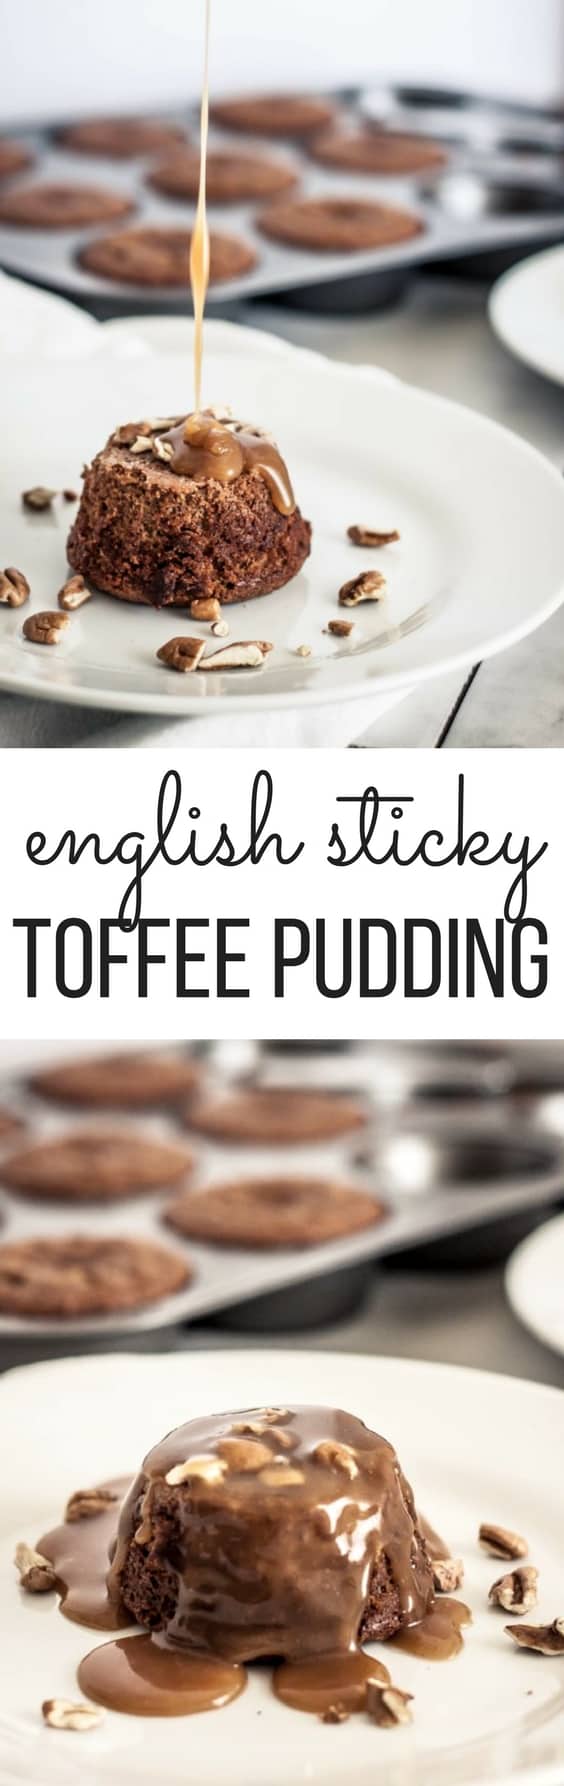 The figs, brown sugar and butter in this English sticky toffee pudding makes the perfect combination. This treat will satisfy any sweet tooth!